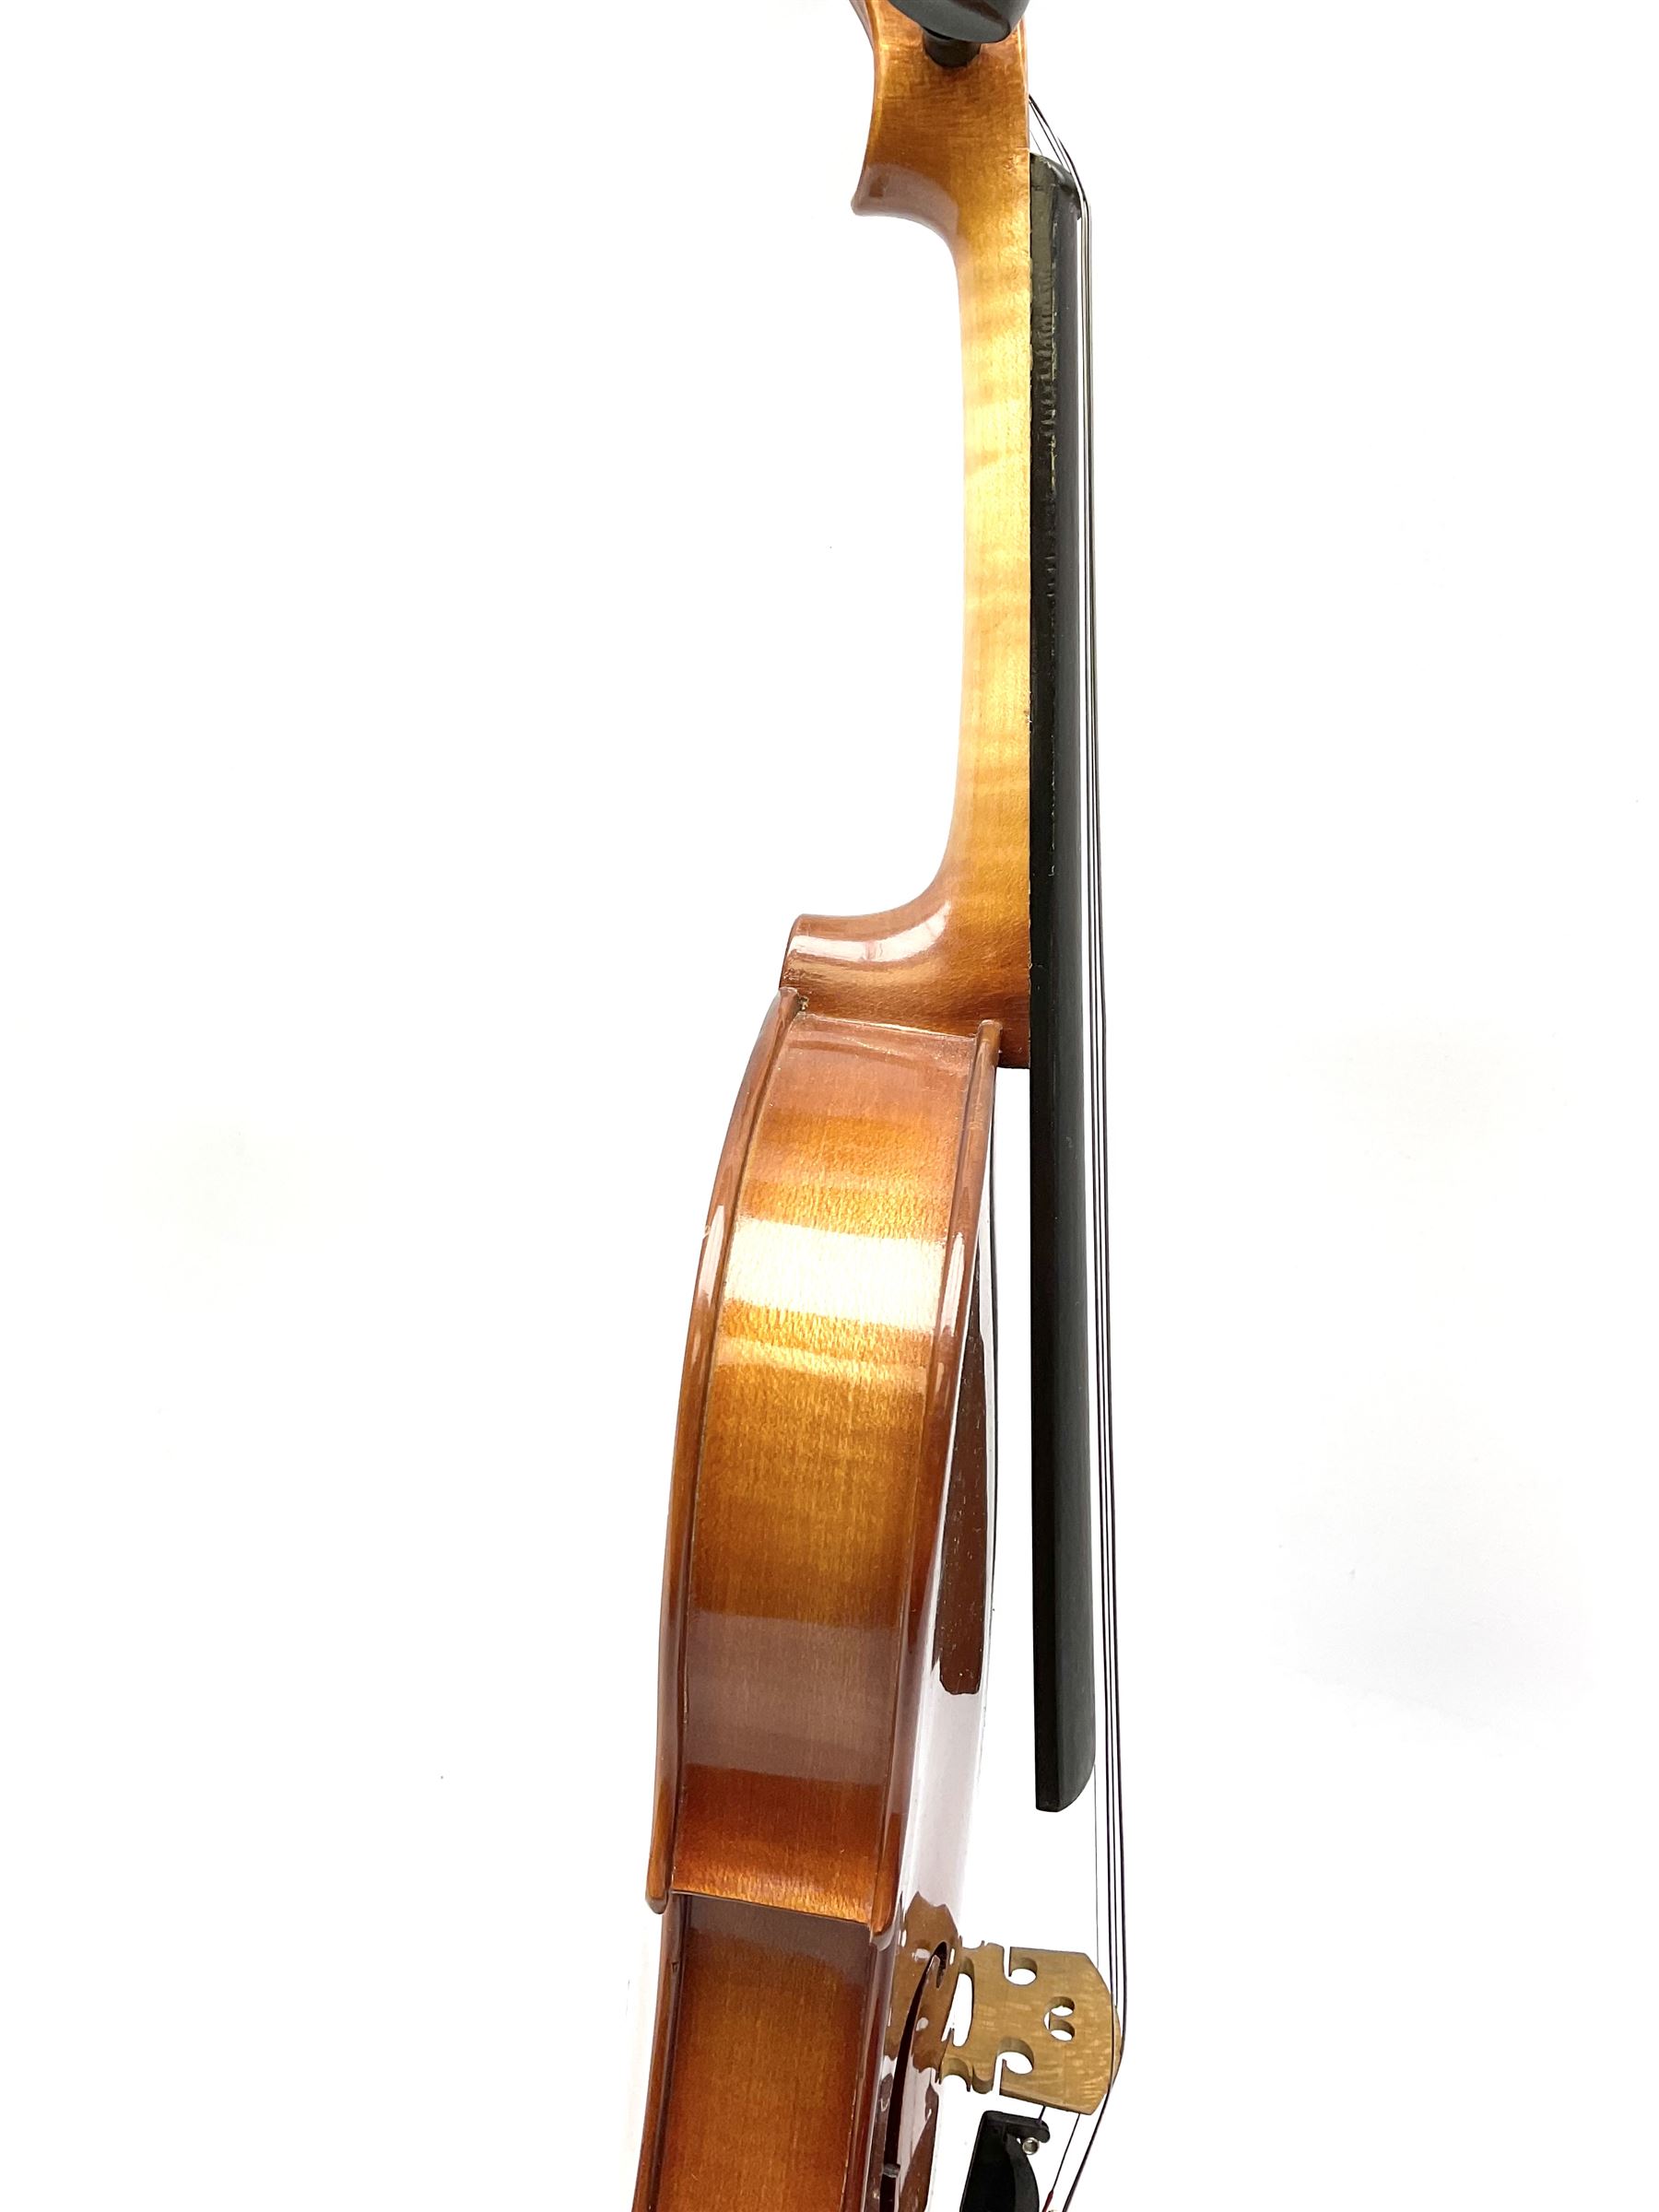 Modern violin with 36cm two-piece maple back and ribs and spruce top 60cm overall - Image 8 of 16